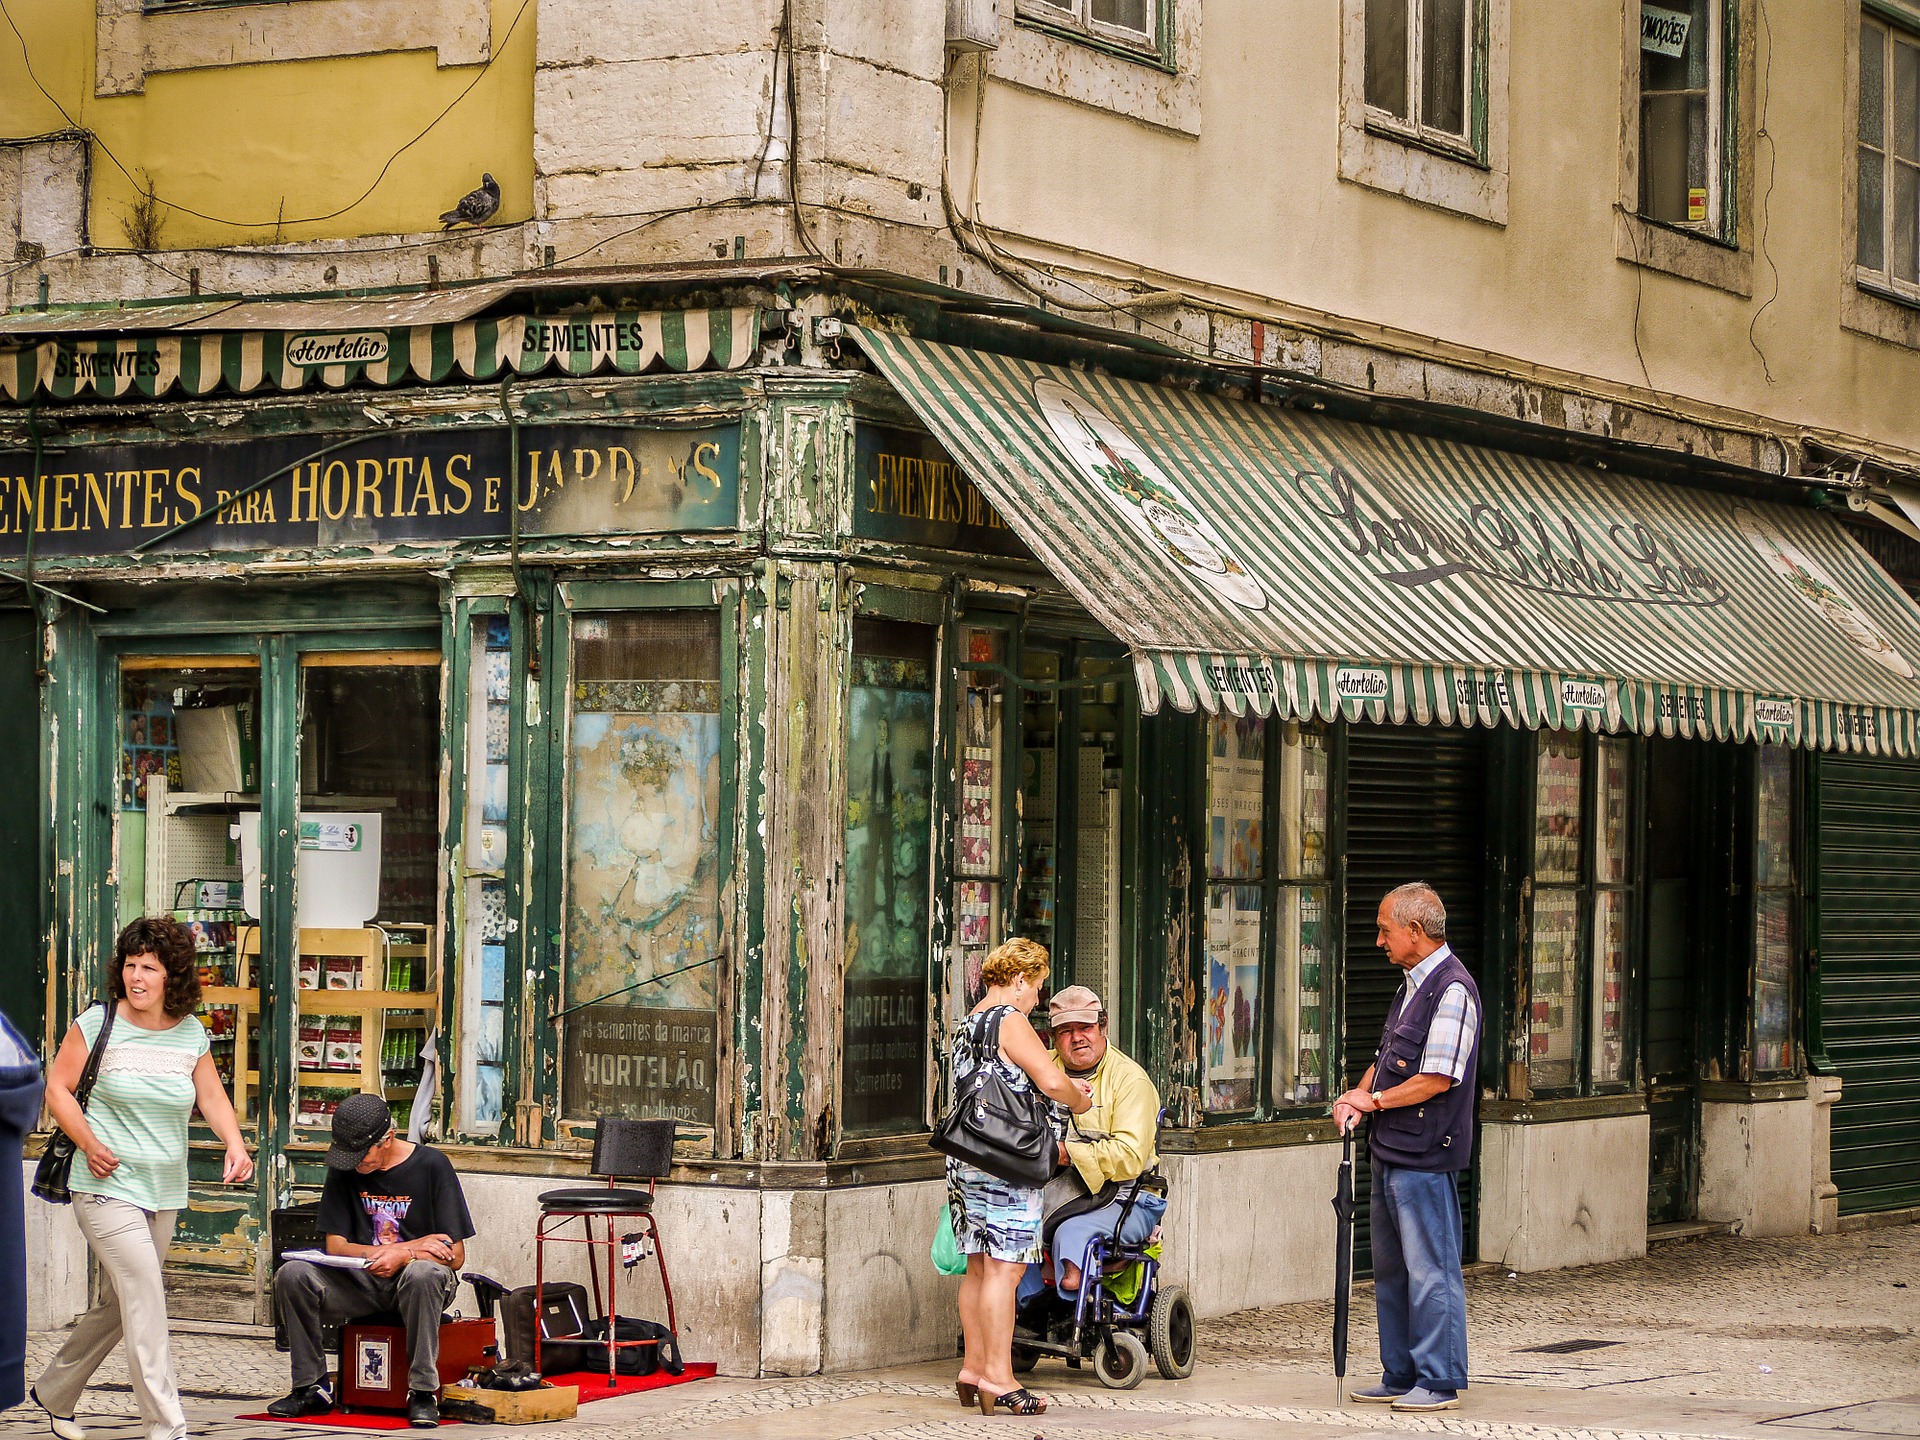 In every neighborhood you experience a different Lisbon